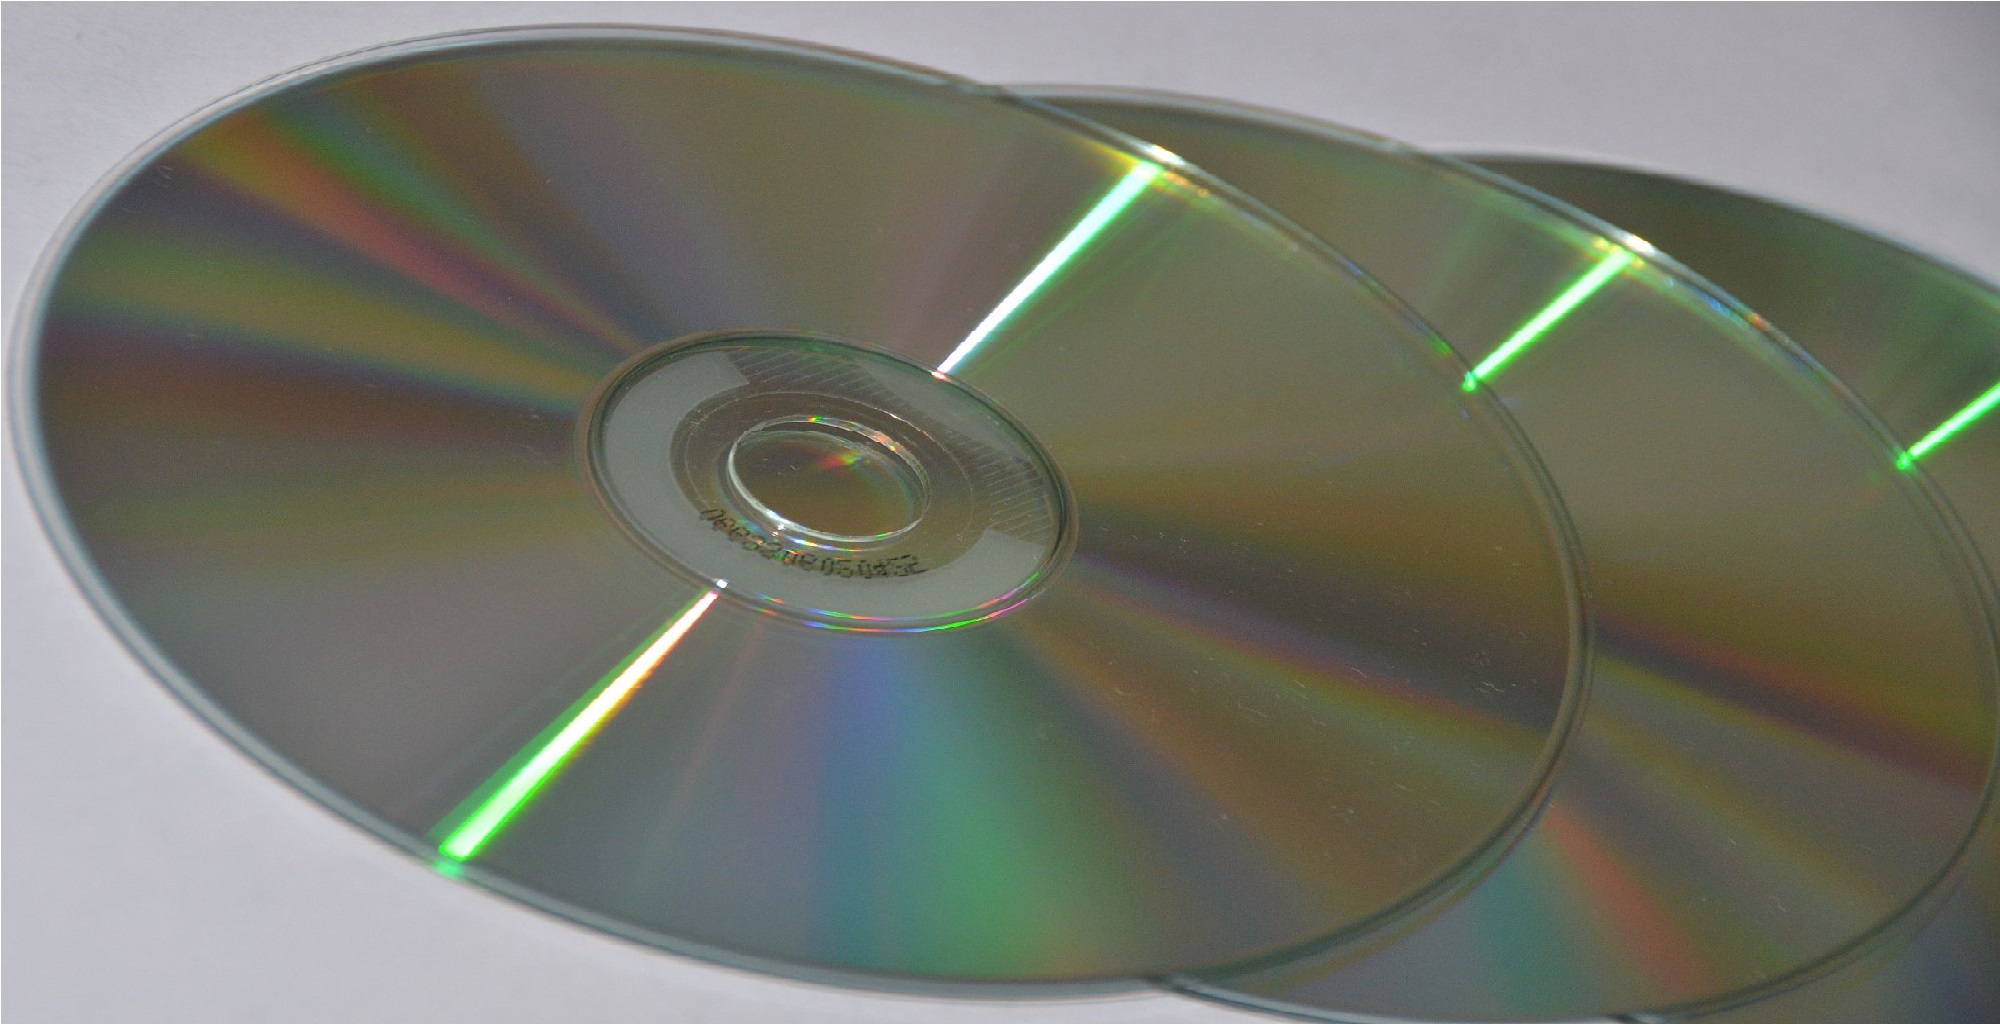 What file format is a DVD?